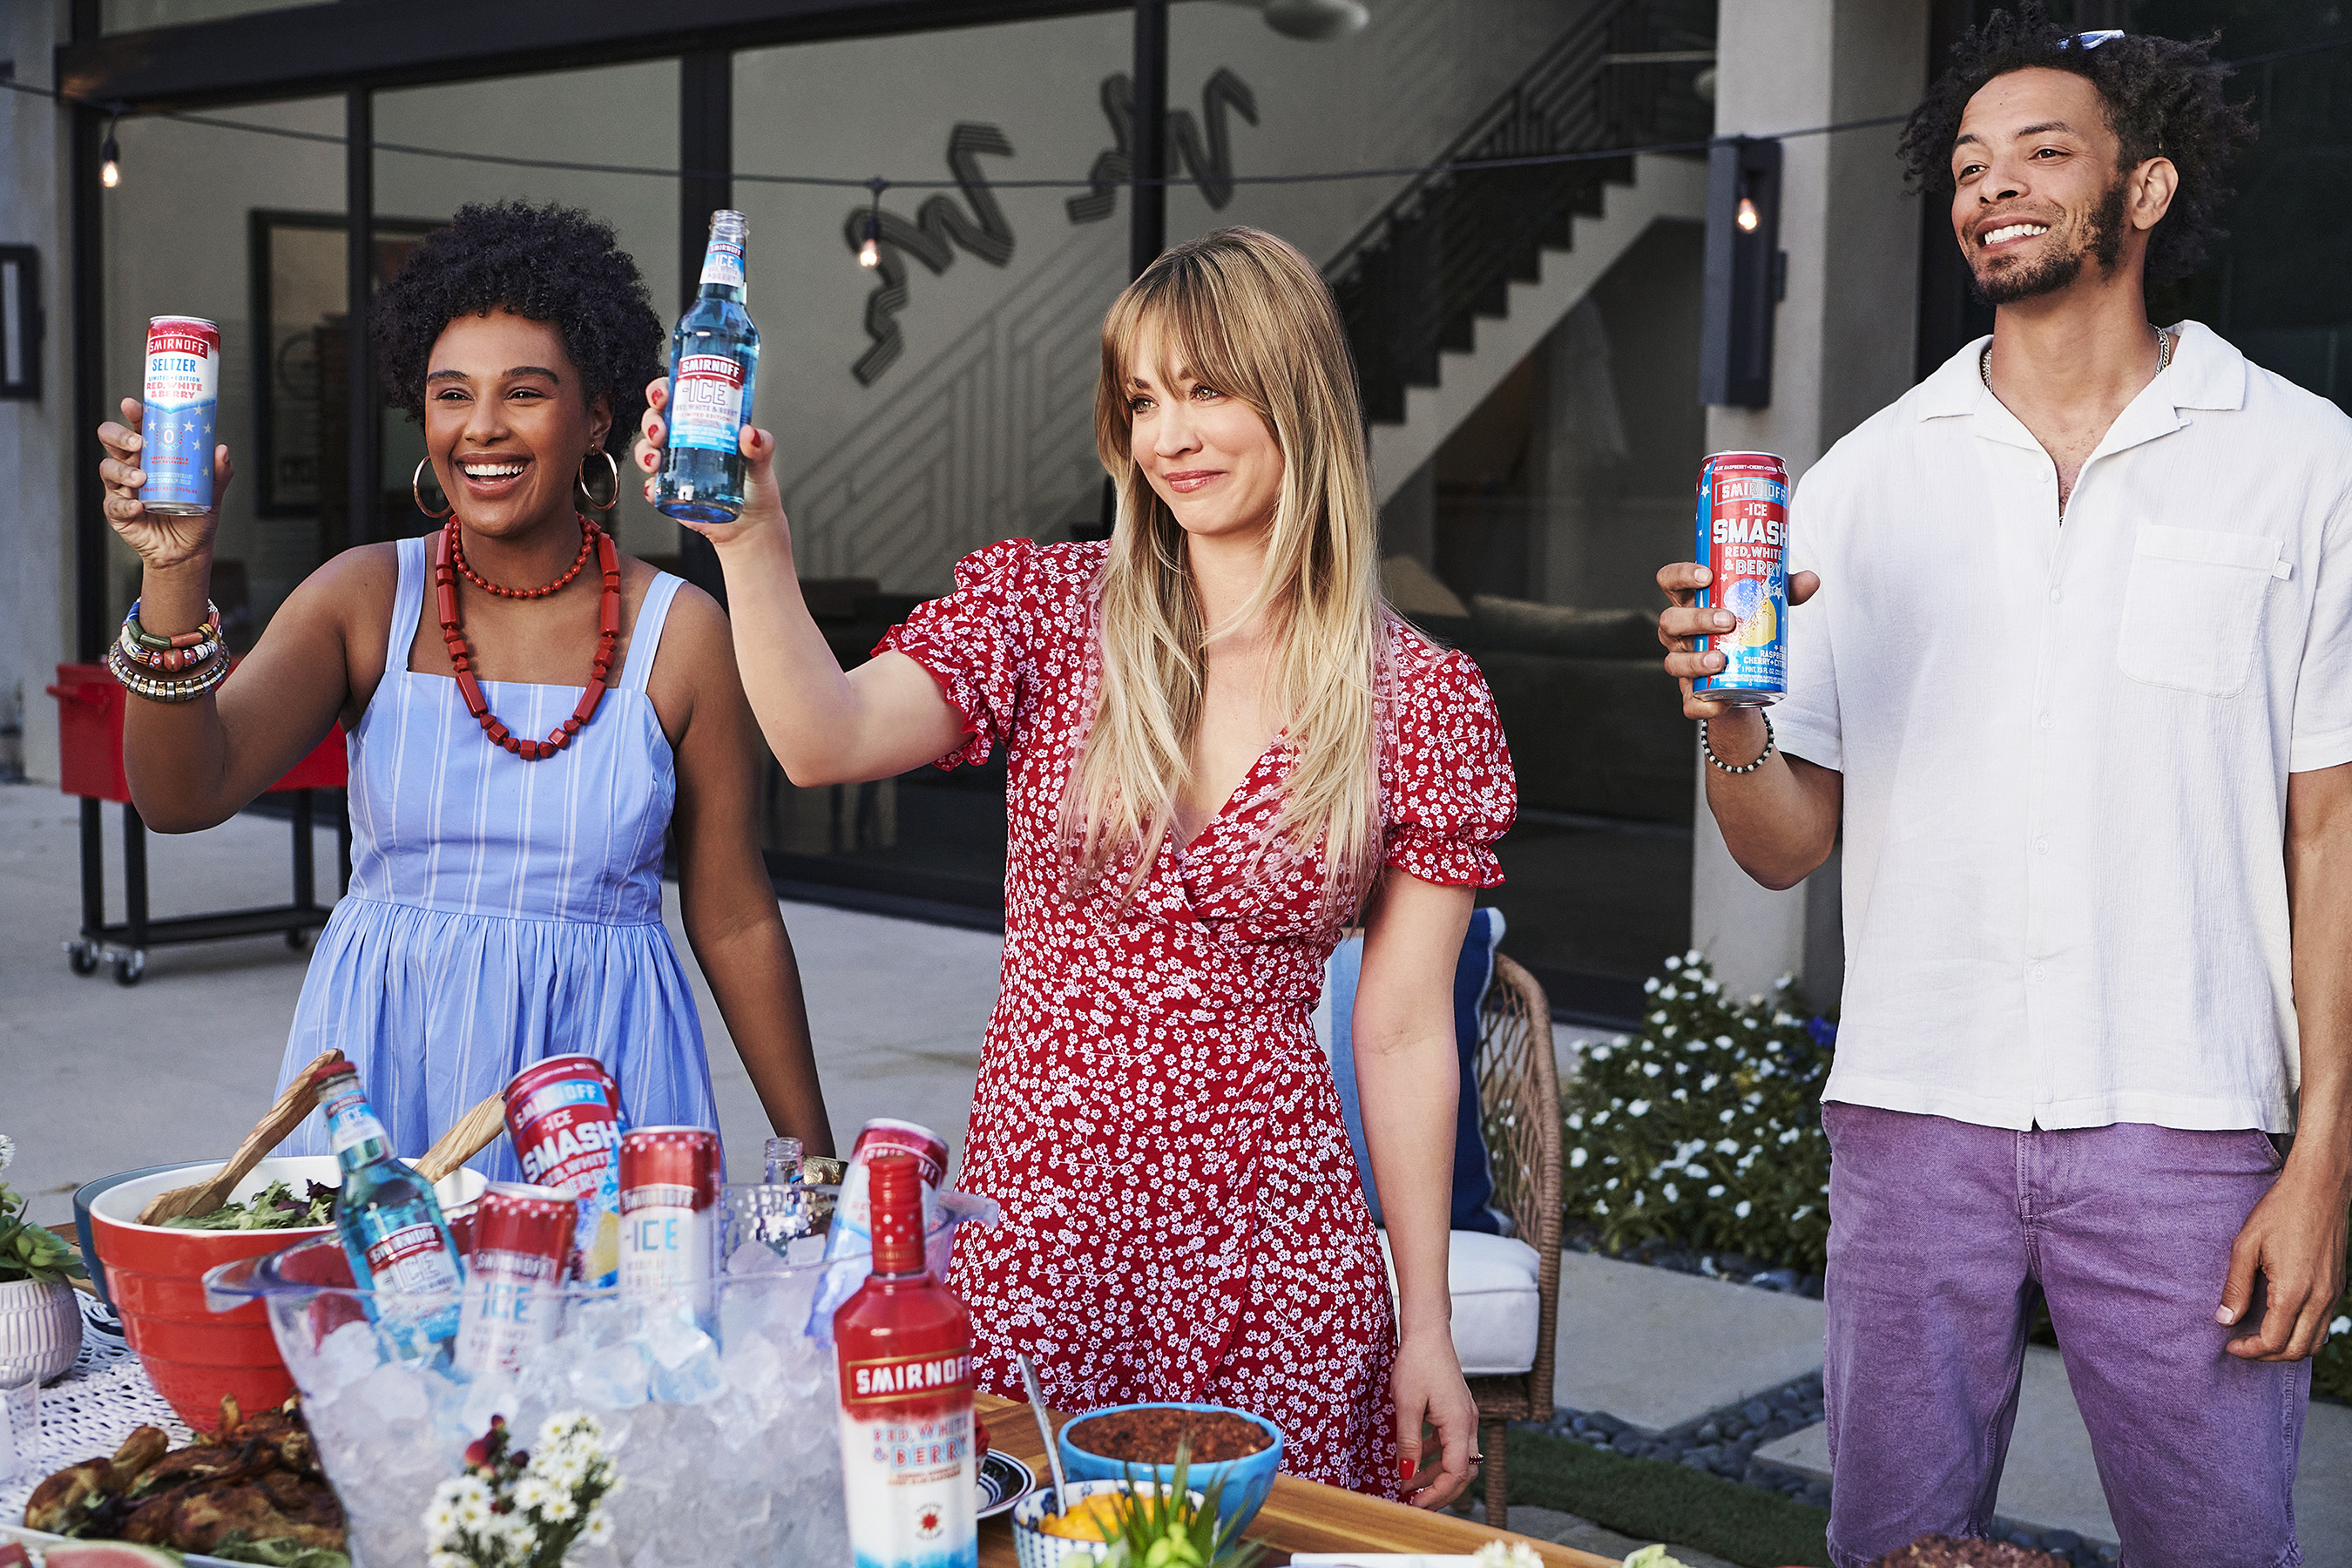 For many, adulthood means responsibilities keep piling up and fun is at an all-time low! Smirnoff Red, White and Berry is turning that around and bringing the fun to adults everywhere with the brand’s new “How to Summer, Grown Up Edition!” campaign.